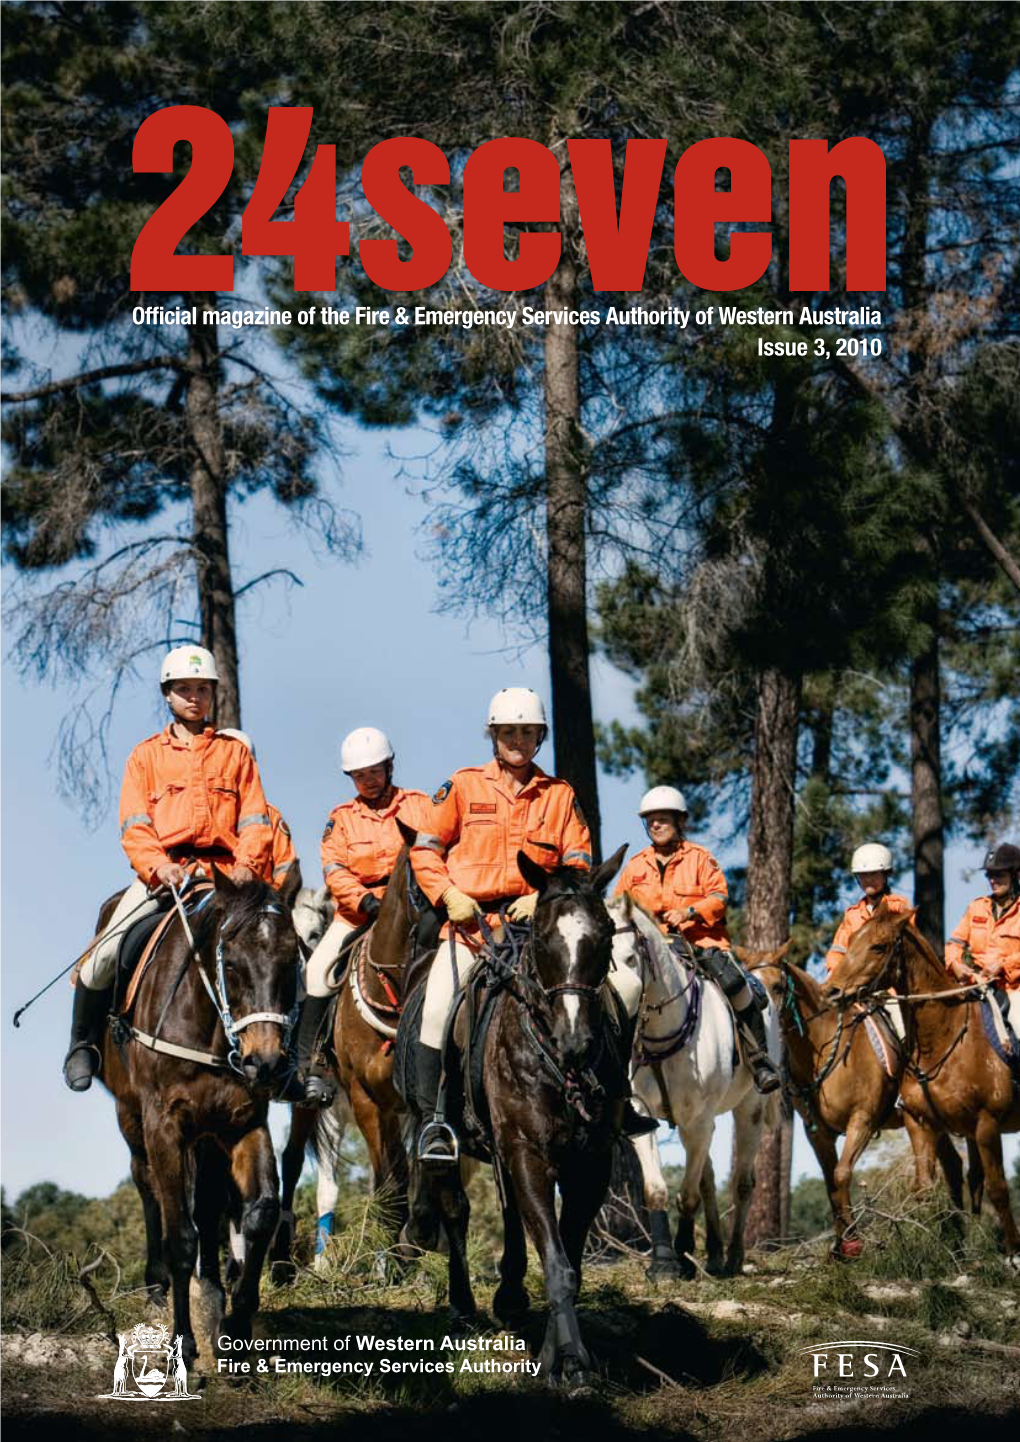 Official Magazine of the Fire & Emergency Services